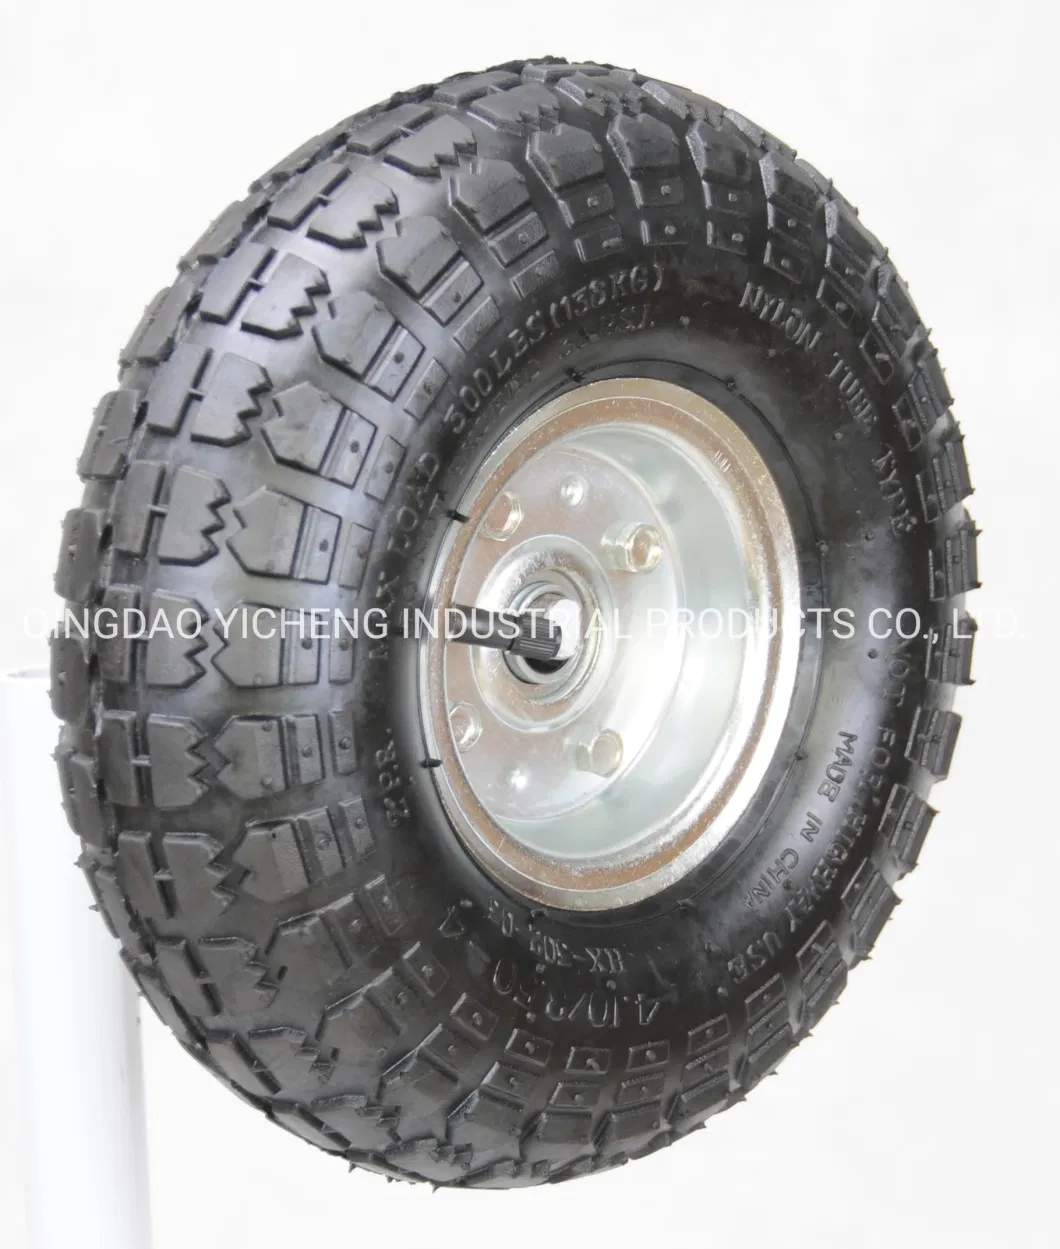 High Quality Wheel for Wheelbarrow Hand Trolley with Best Price